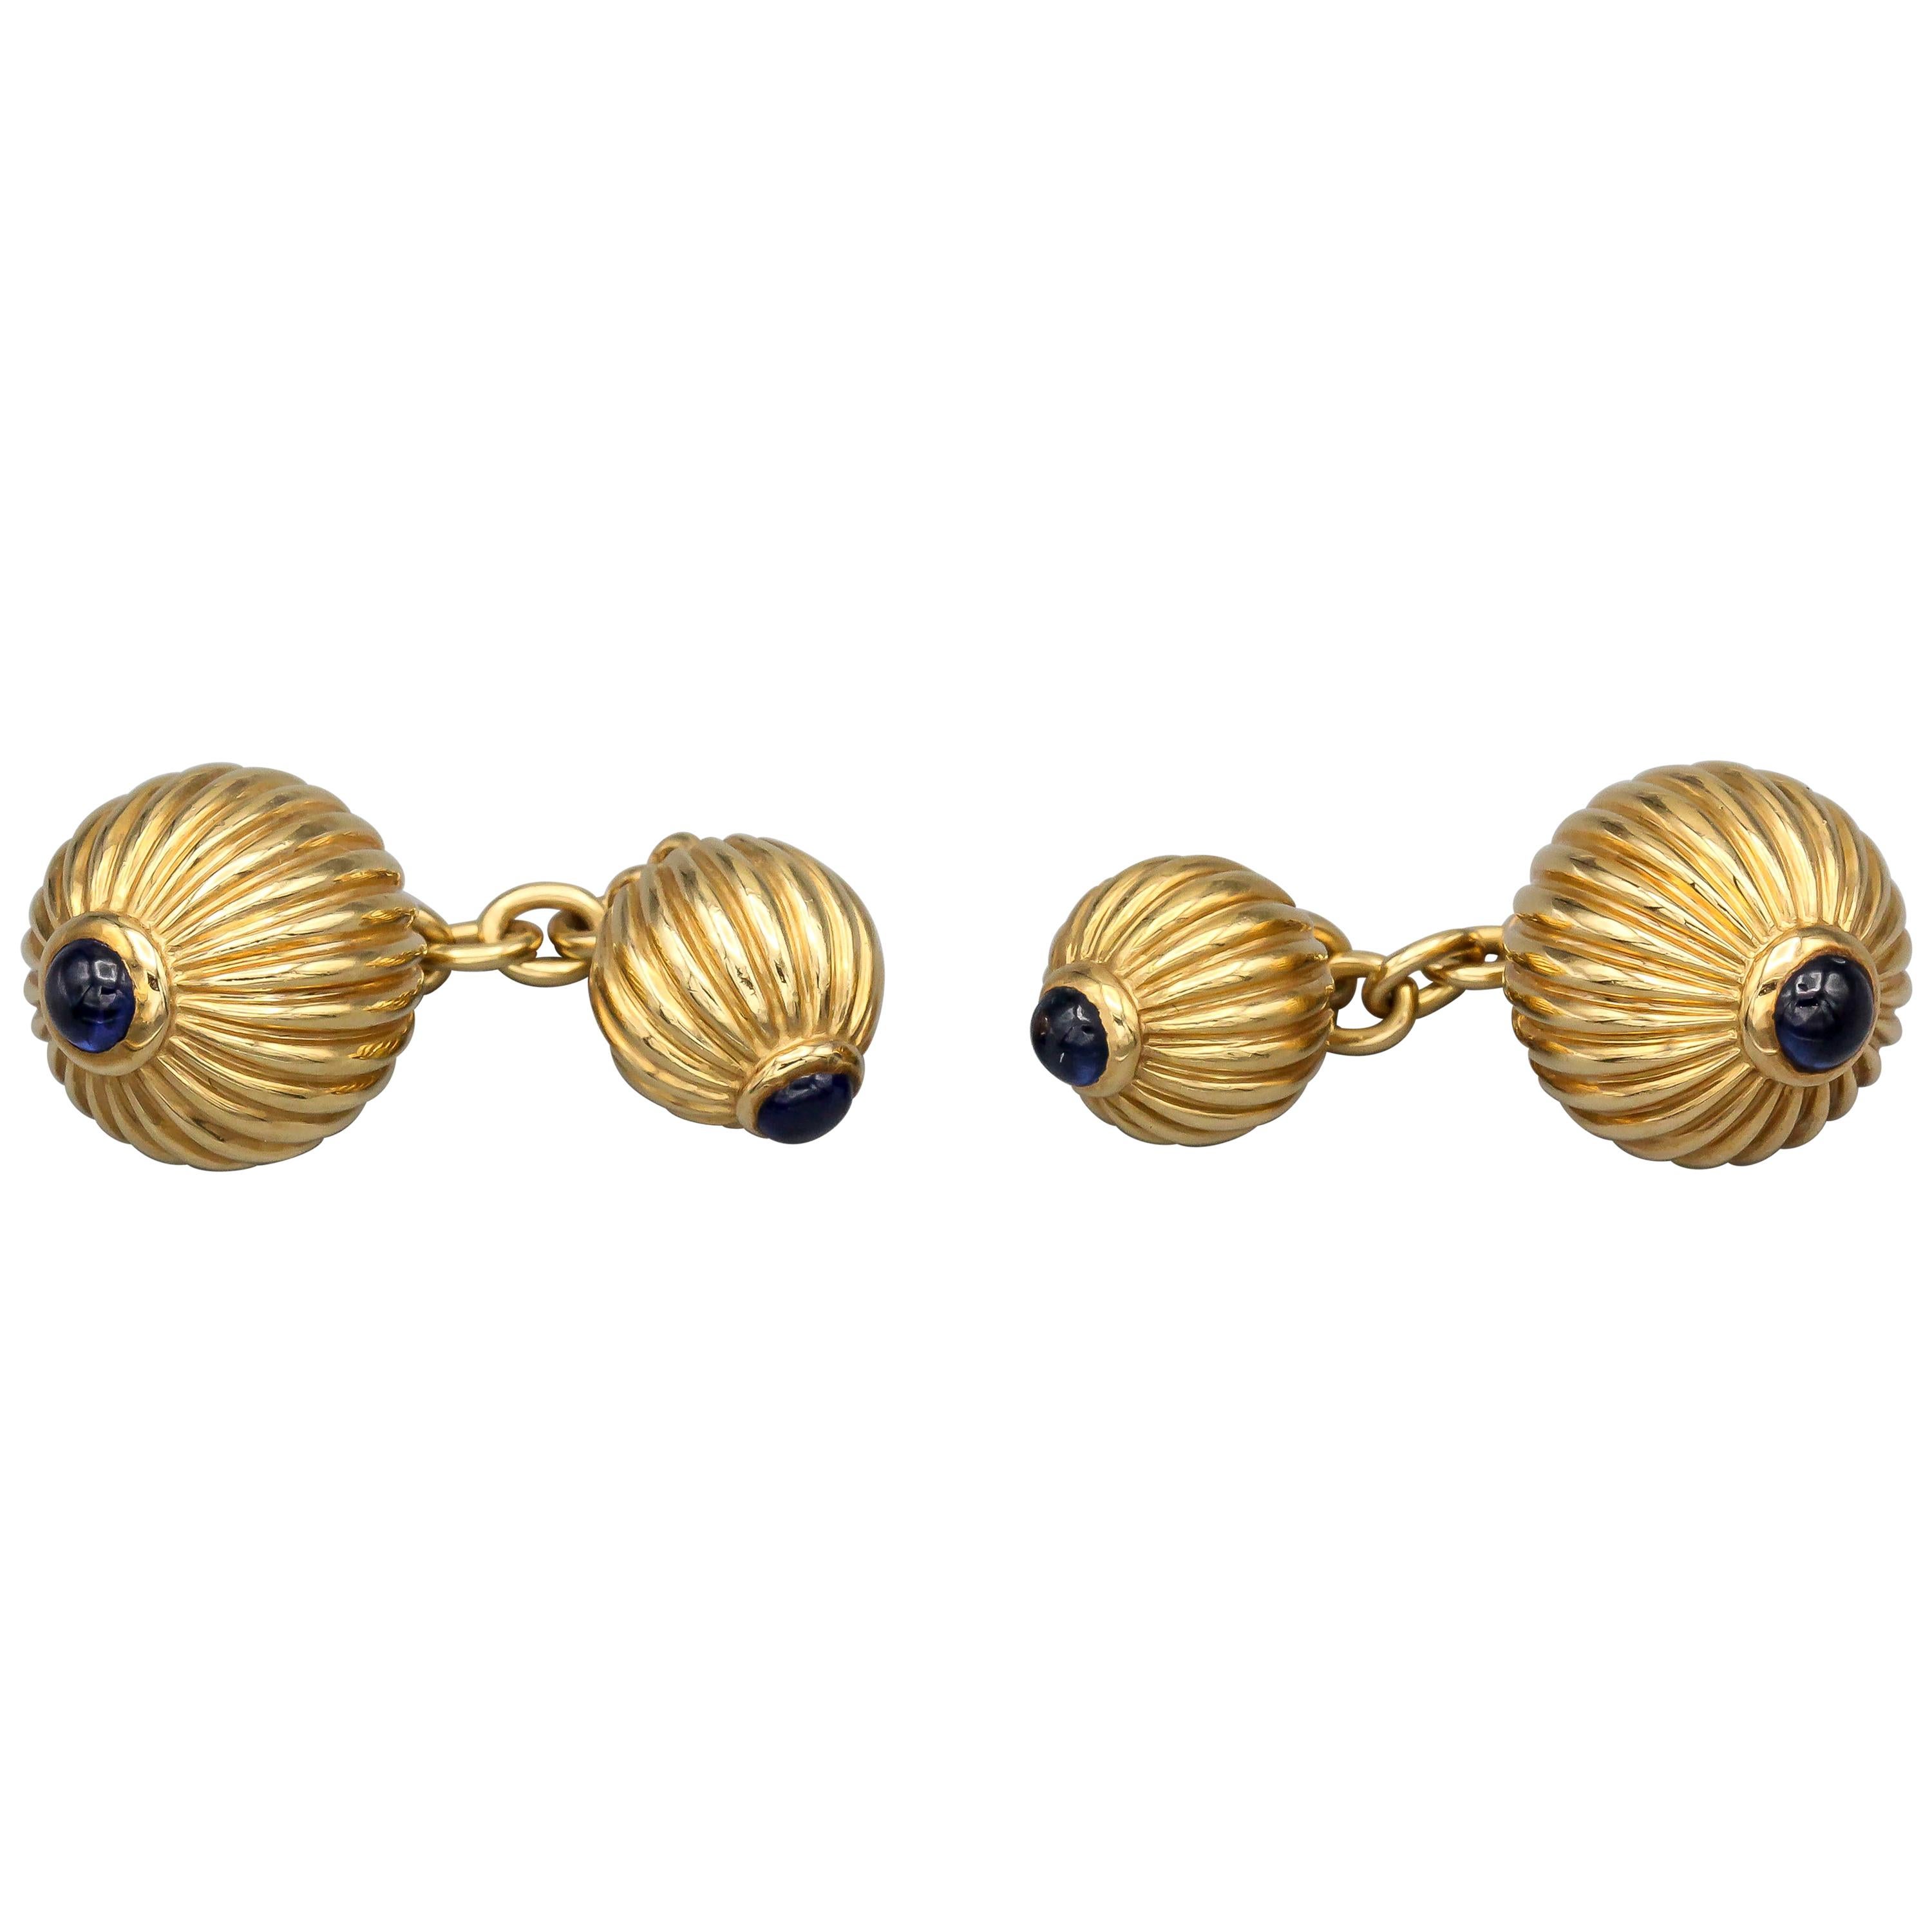 Rare and fine cabochon sapphire and 18K yellow gold cufflink and three stud set,  from the Pasha collection by Cartier, circa 1991. They feature a round, ribbed designs with cabochon sapphire ends .

Hallmarks: Cartier, 1991, reference numbers, 750.